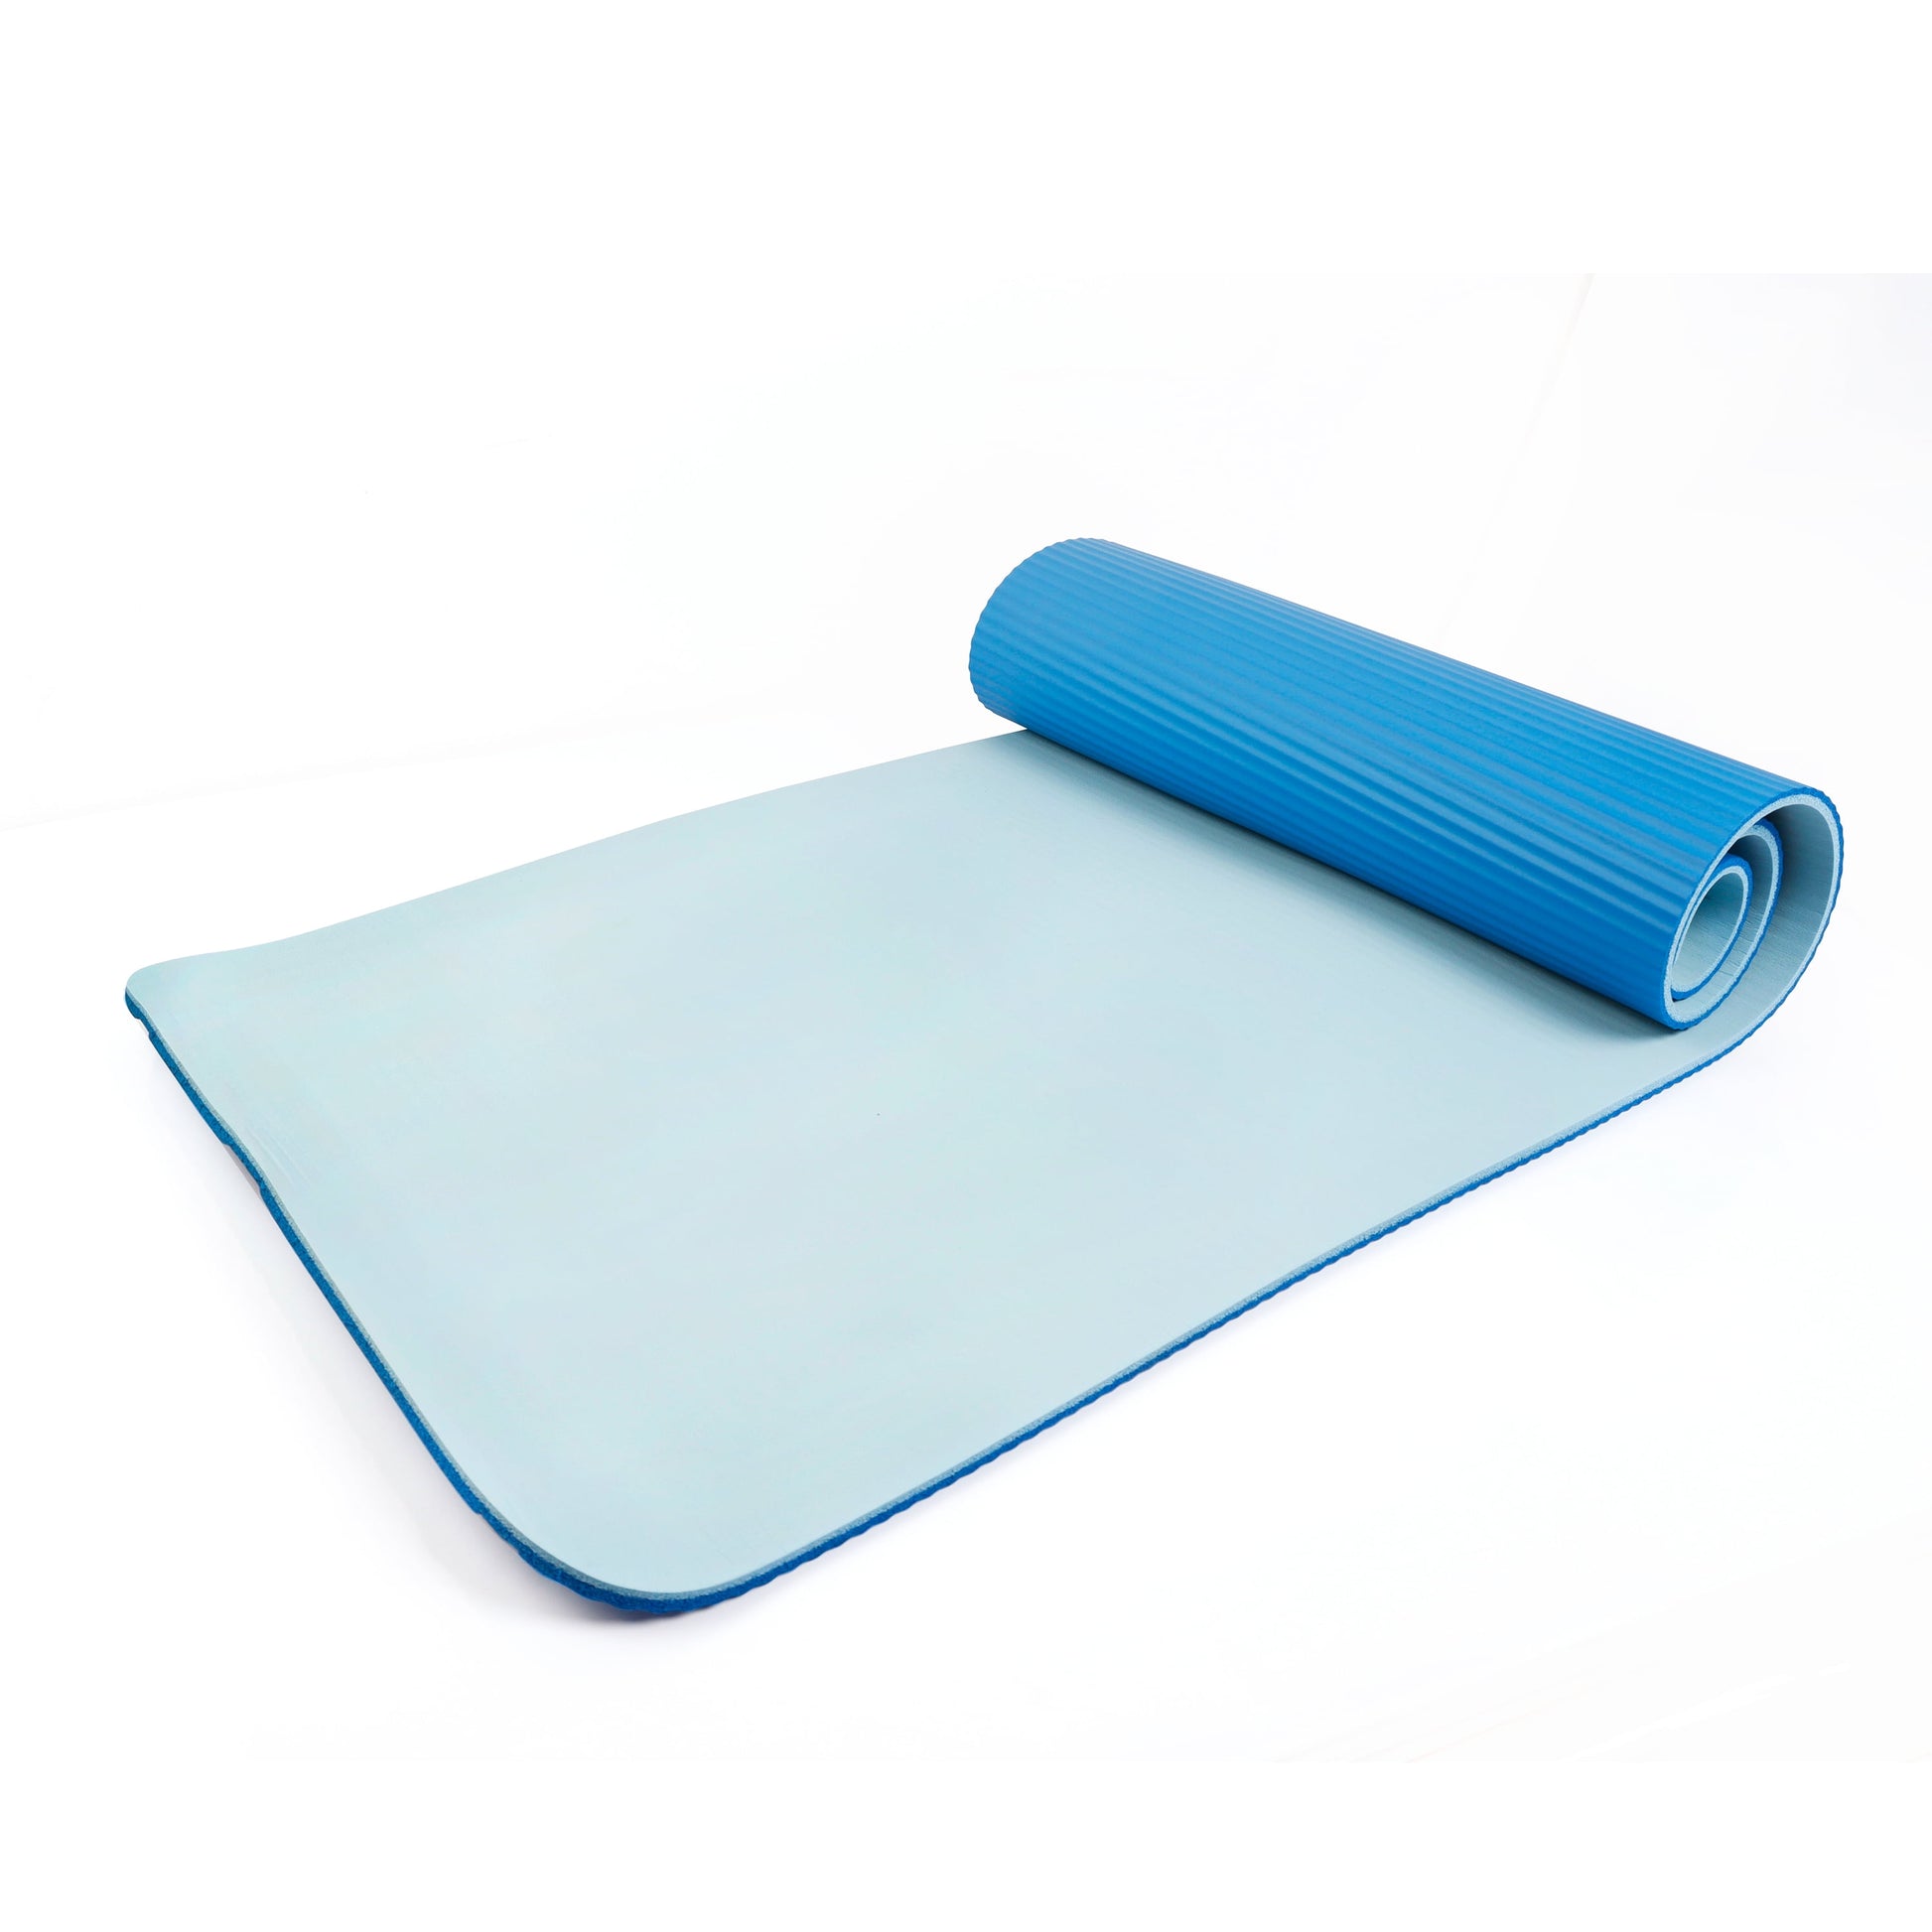 Two Tone Fitness Mat, 10Mm, 72Inx24In, Blue Color, NBR Foam, with Carry Strap